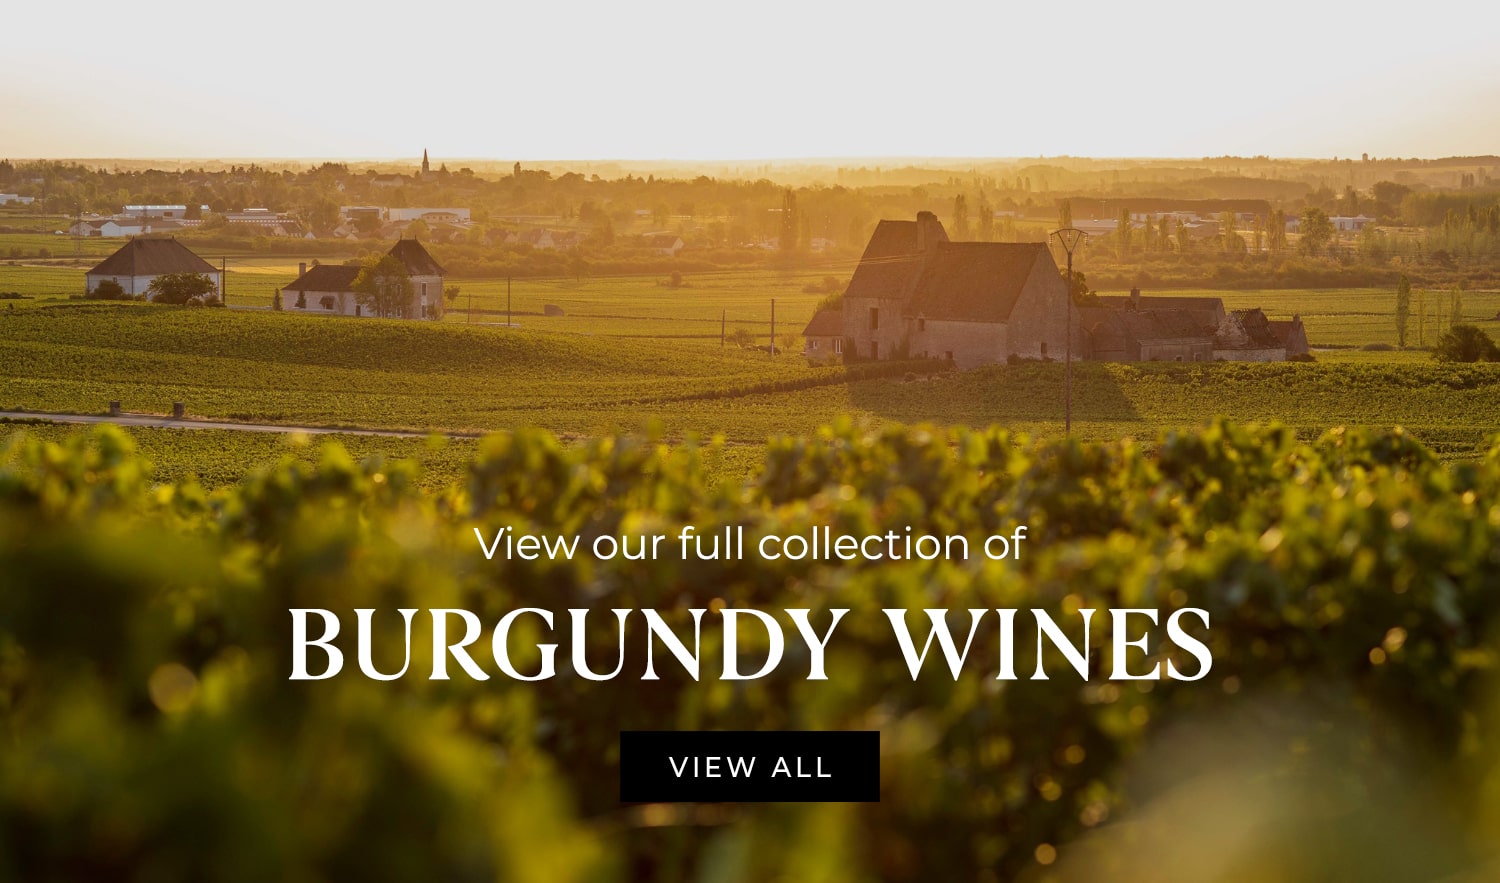 View all Burgundy wines